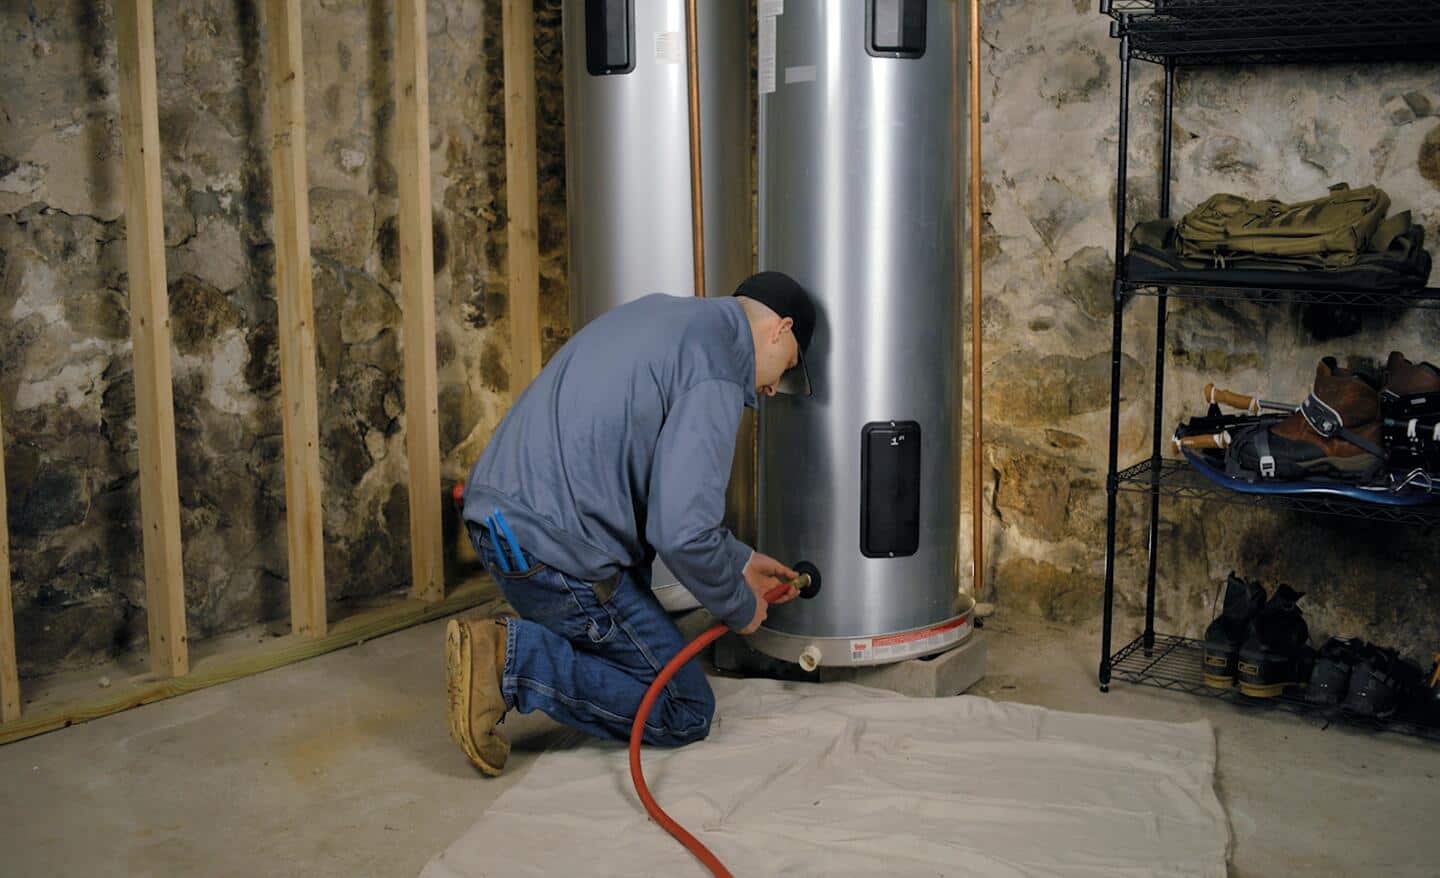 Water Heater Insulation Benefits and Steps, Part 2